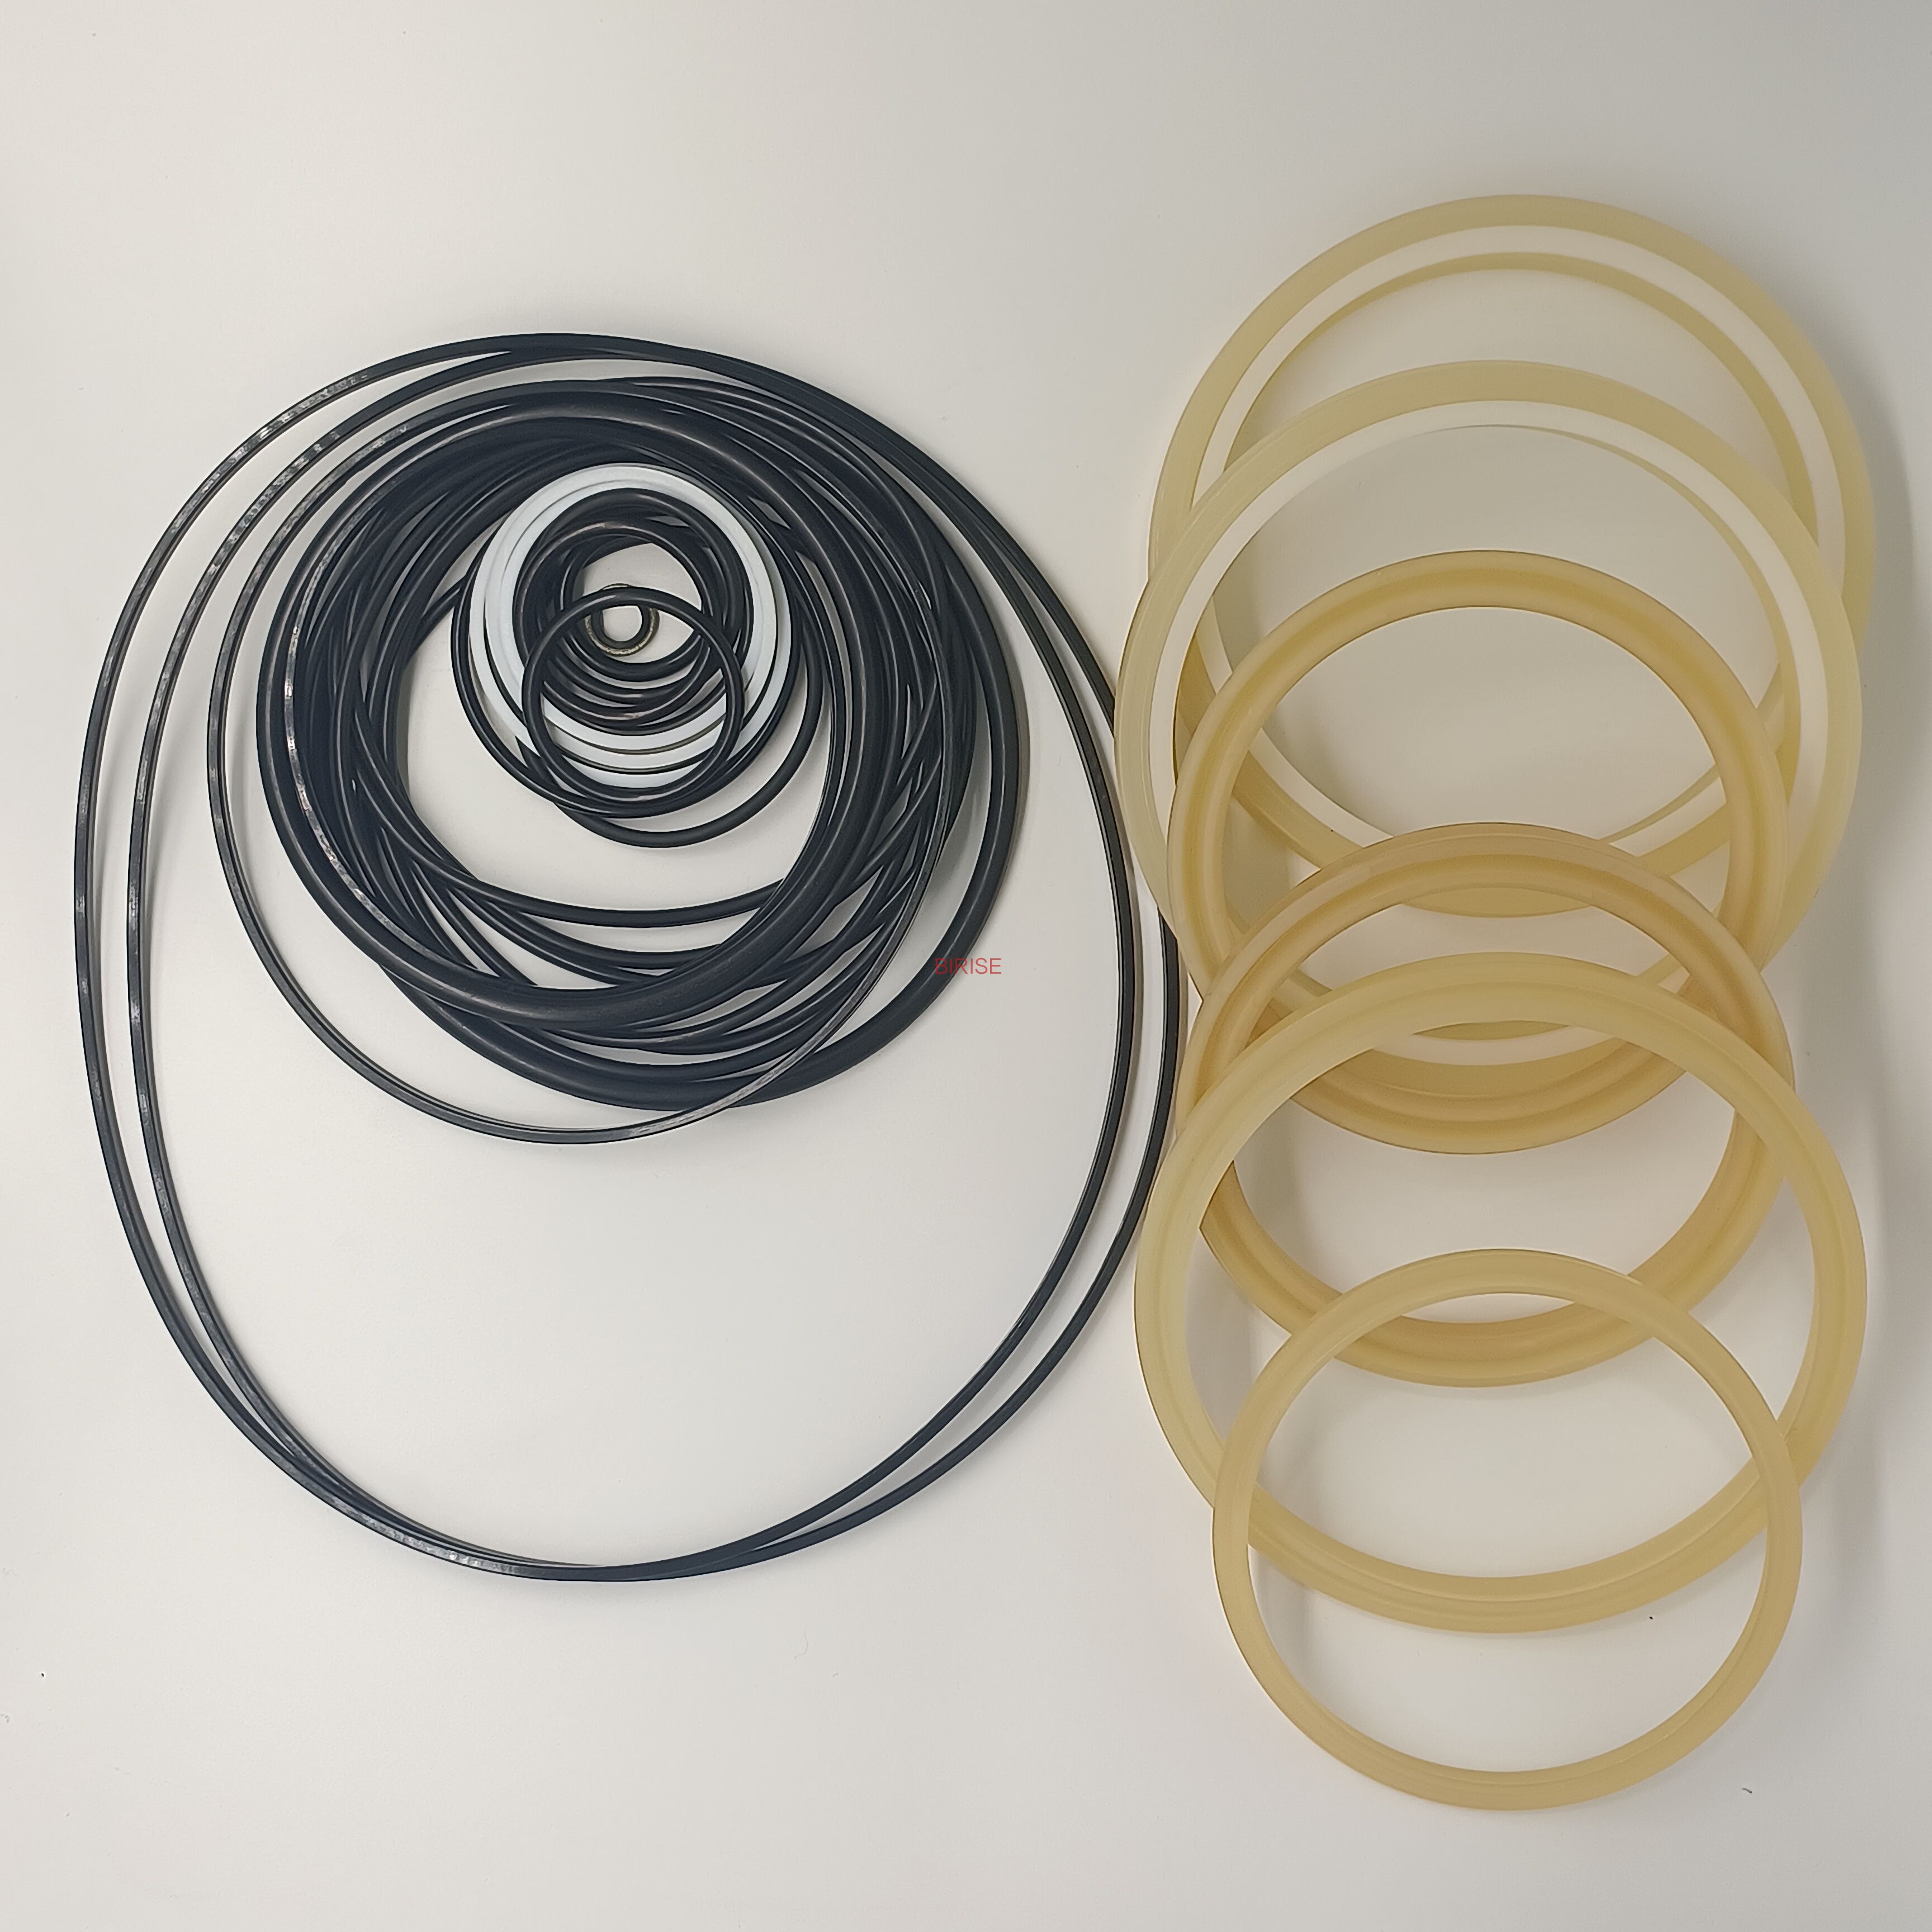 Hydraulic Breaker Seal Kits | Replacement Seals for Various Components